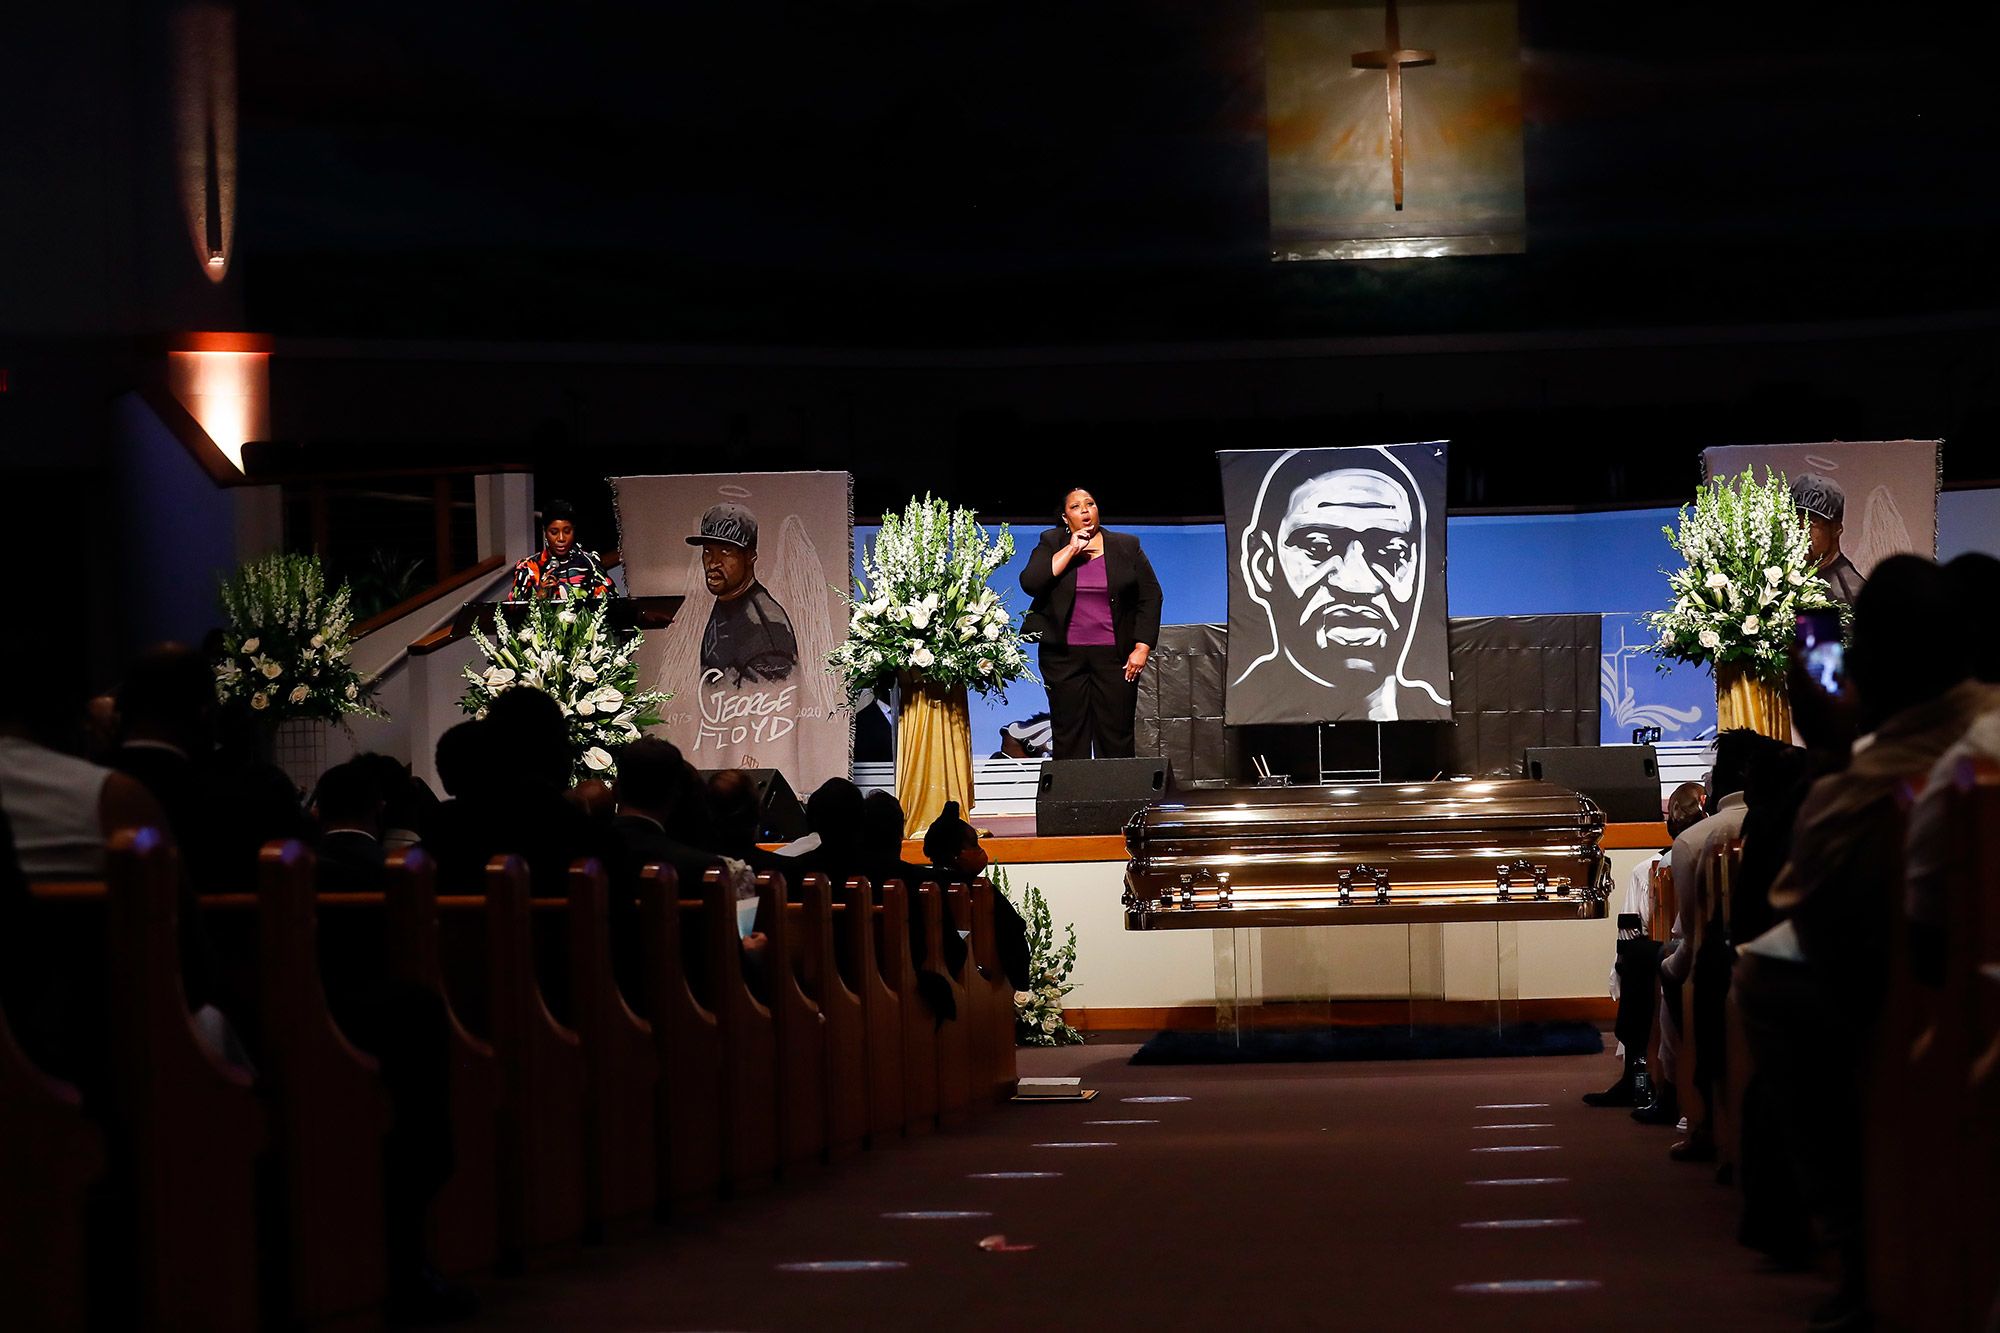 Turner's funeral leaves mourners with message of hope